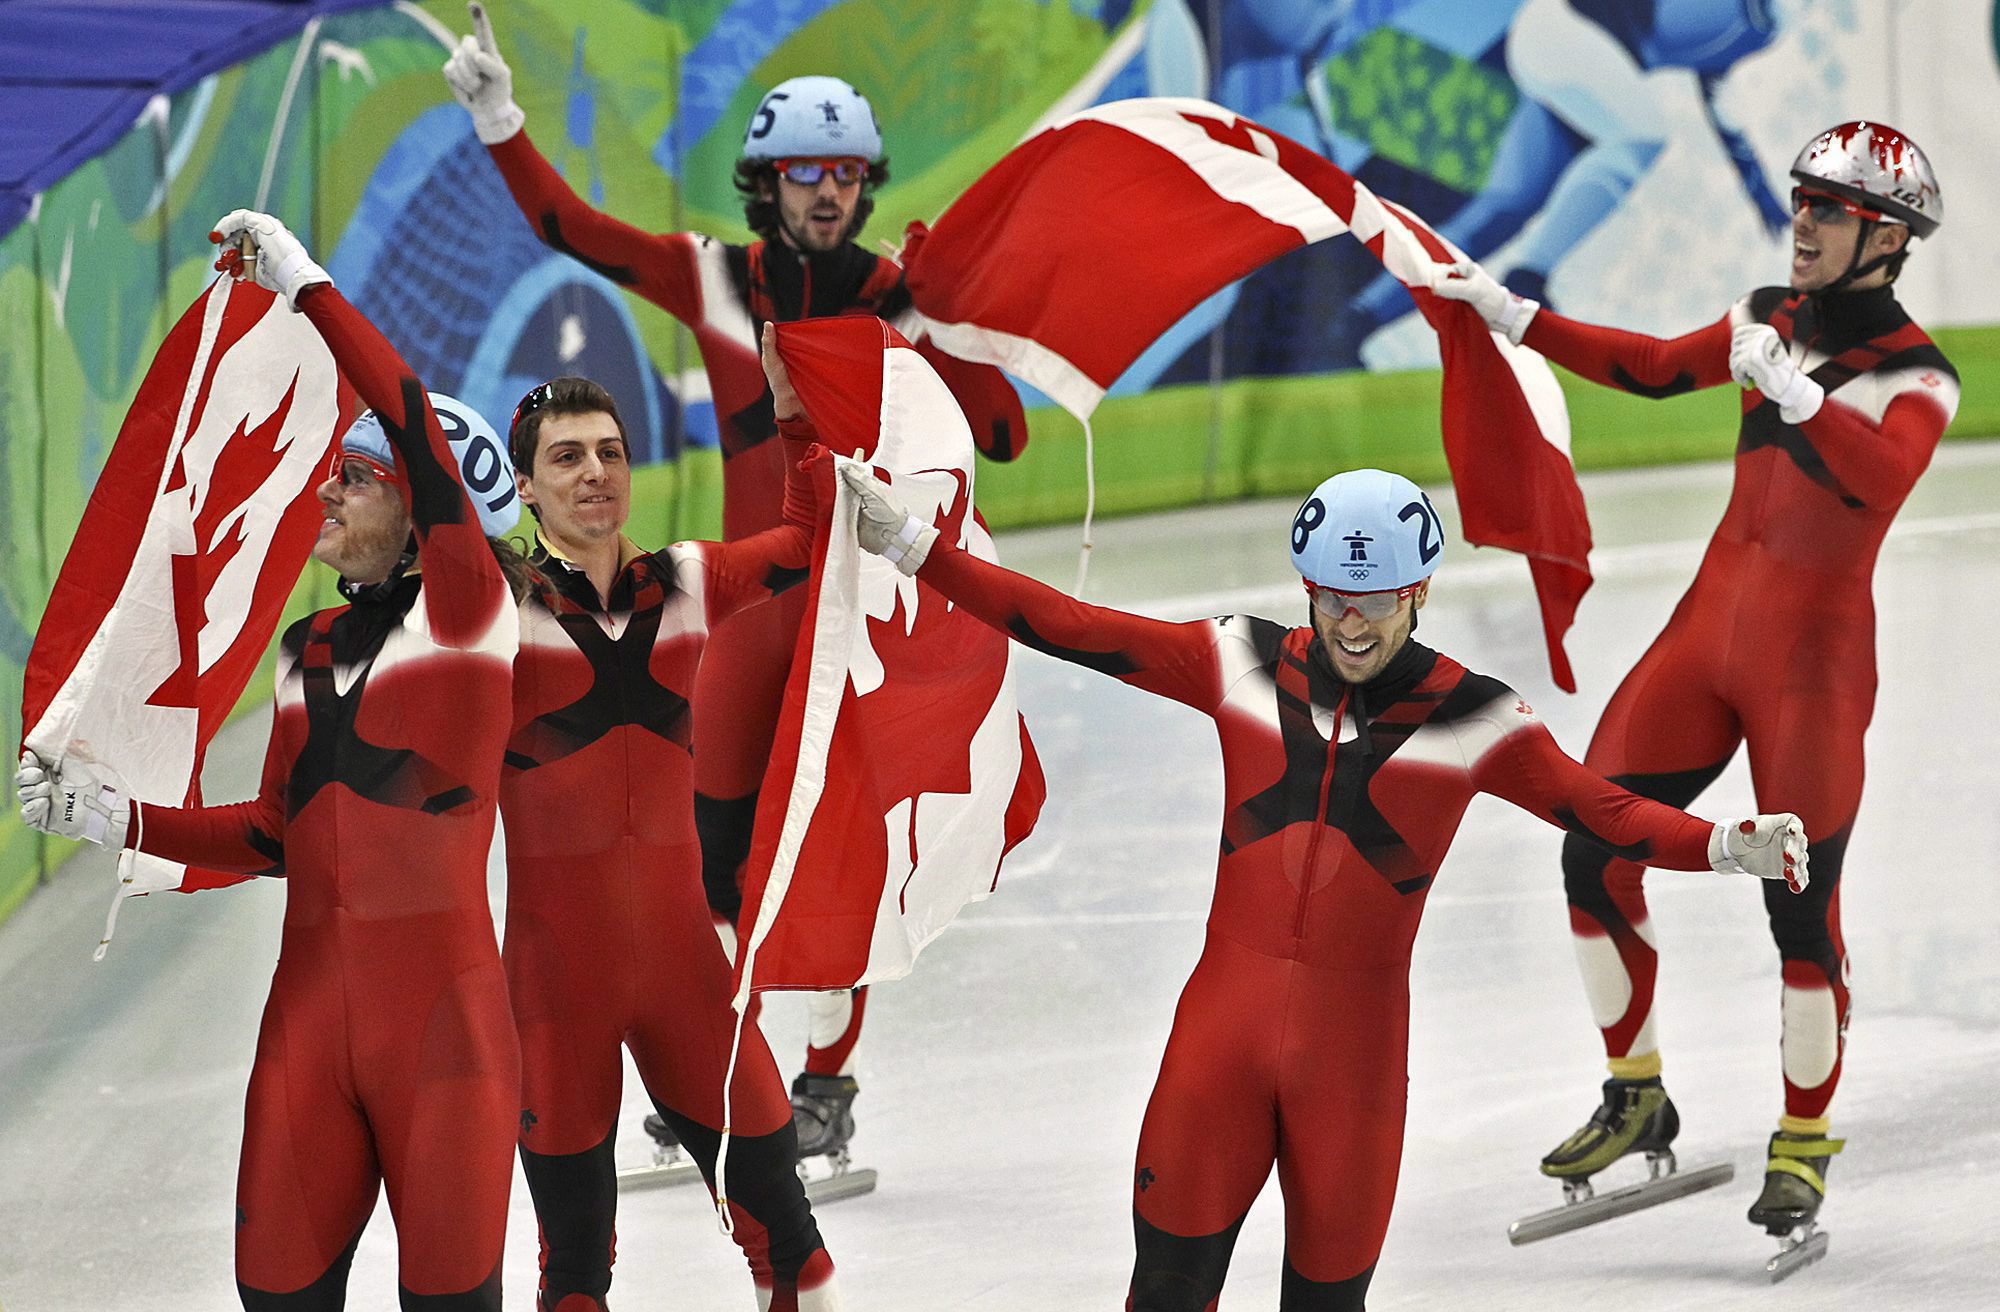 Short track speed skaters carry Canadian flag